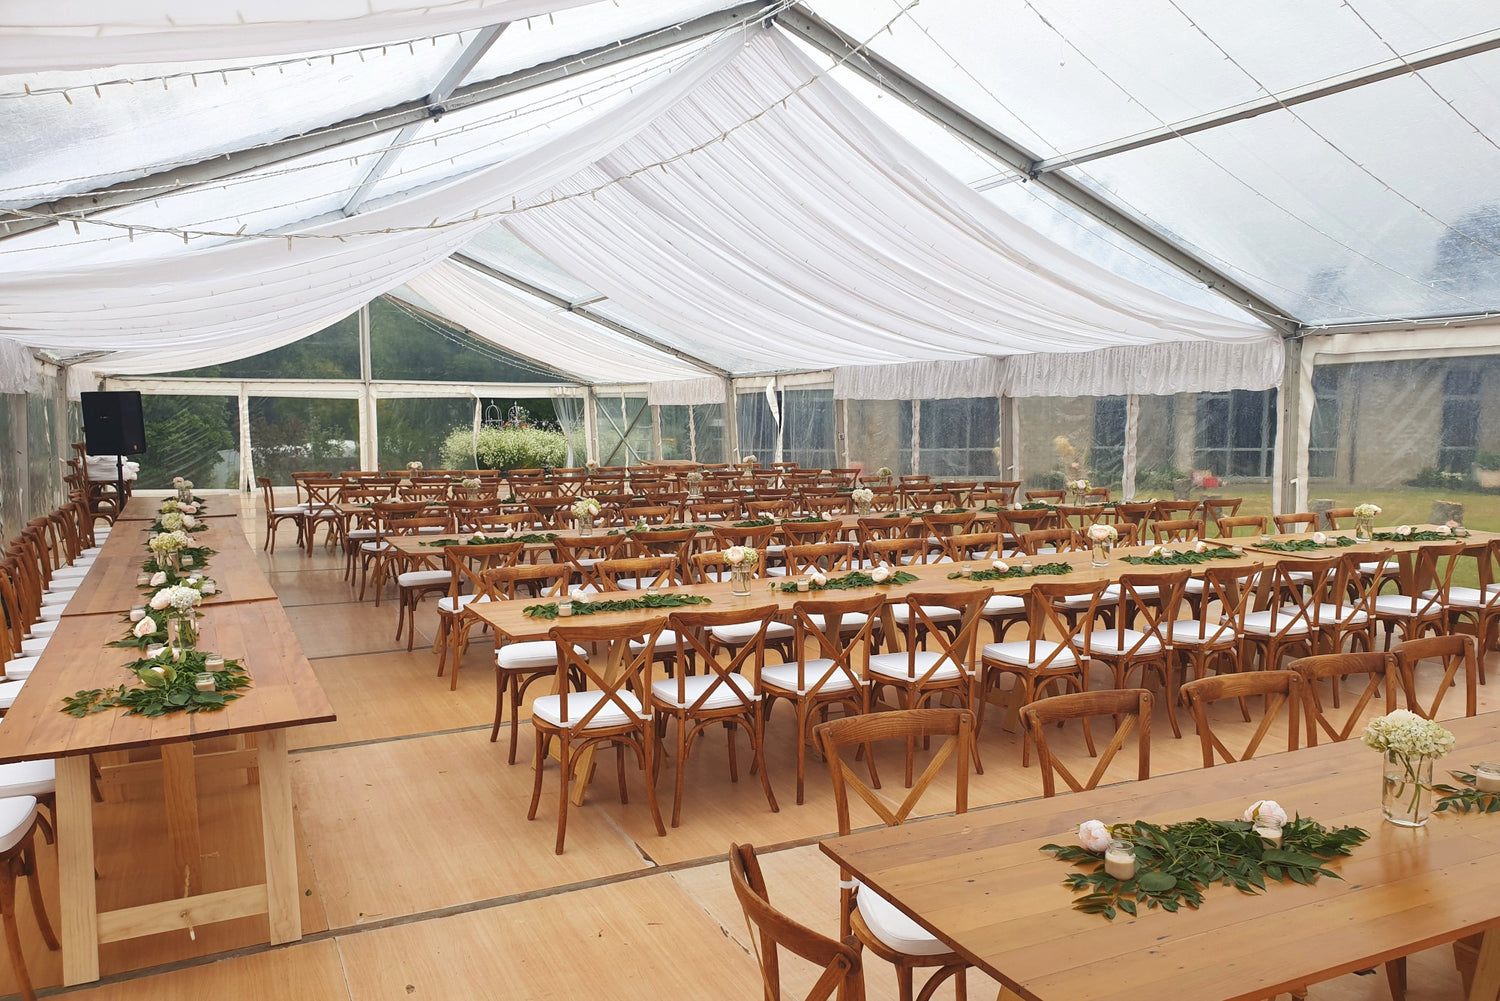 NZ Marquee Hire has a Zero Risk Booking policy for covid impact